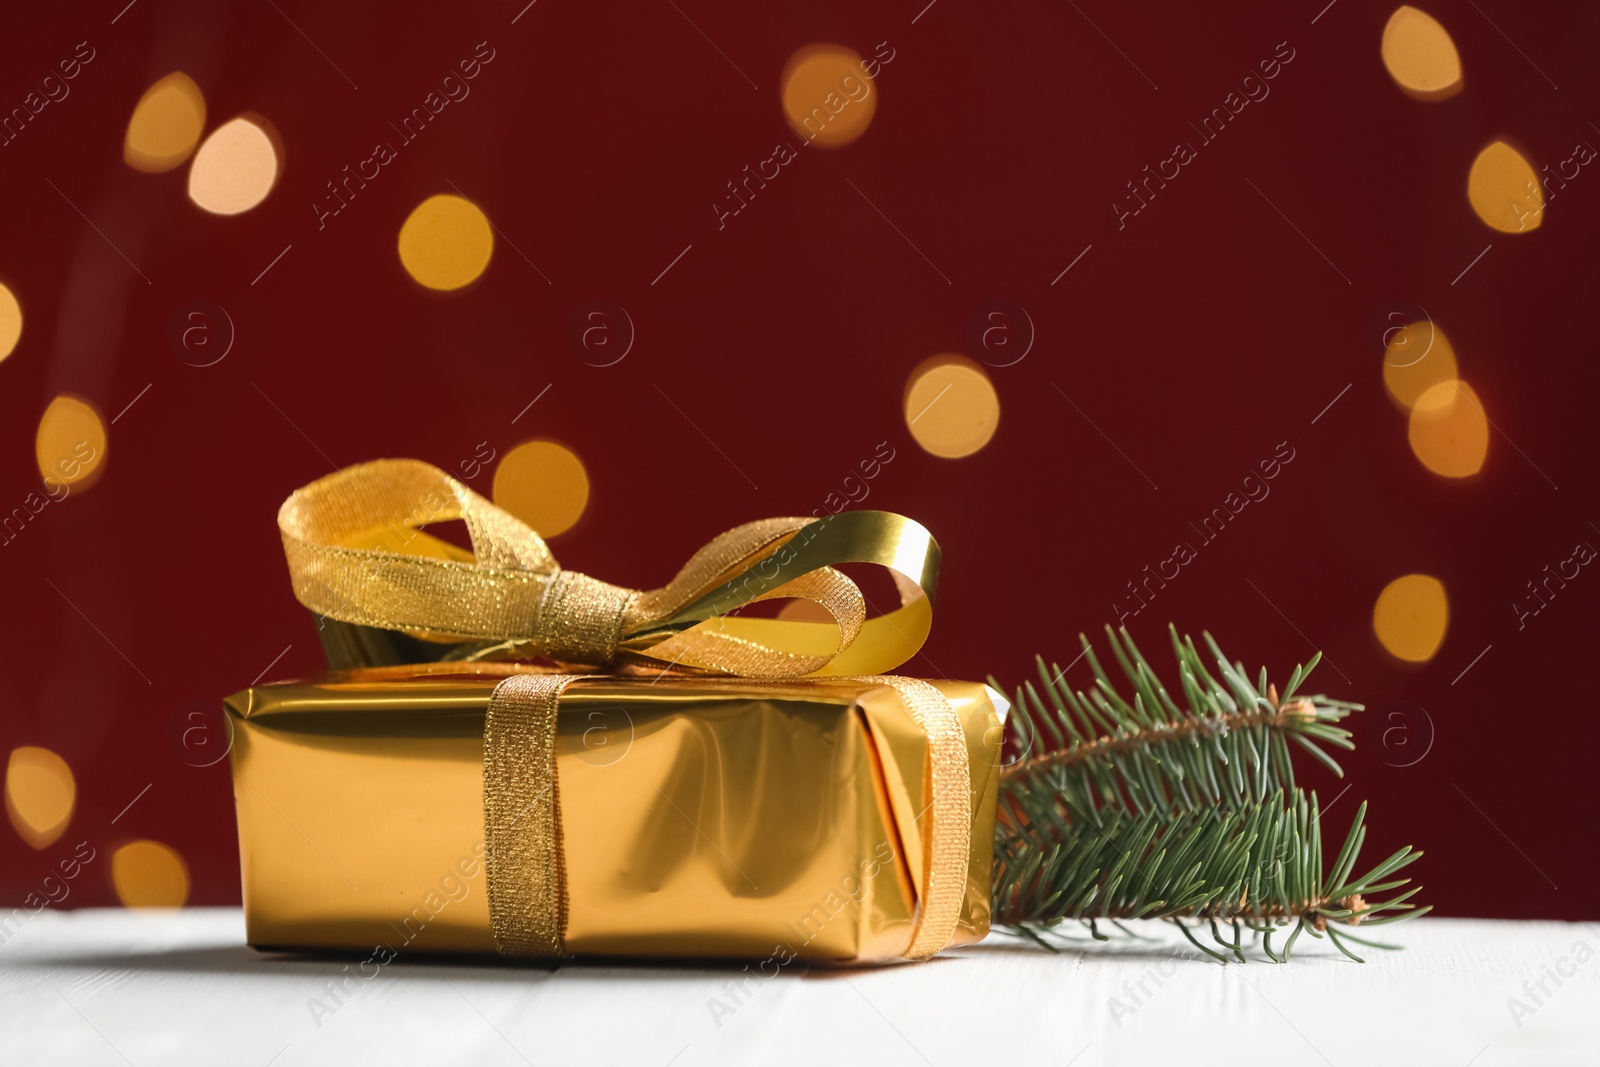 Photo of Golden gift box and fir tree twig against red background with blurred lights, space for text